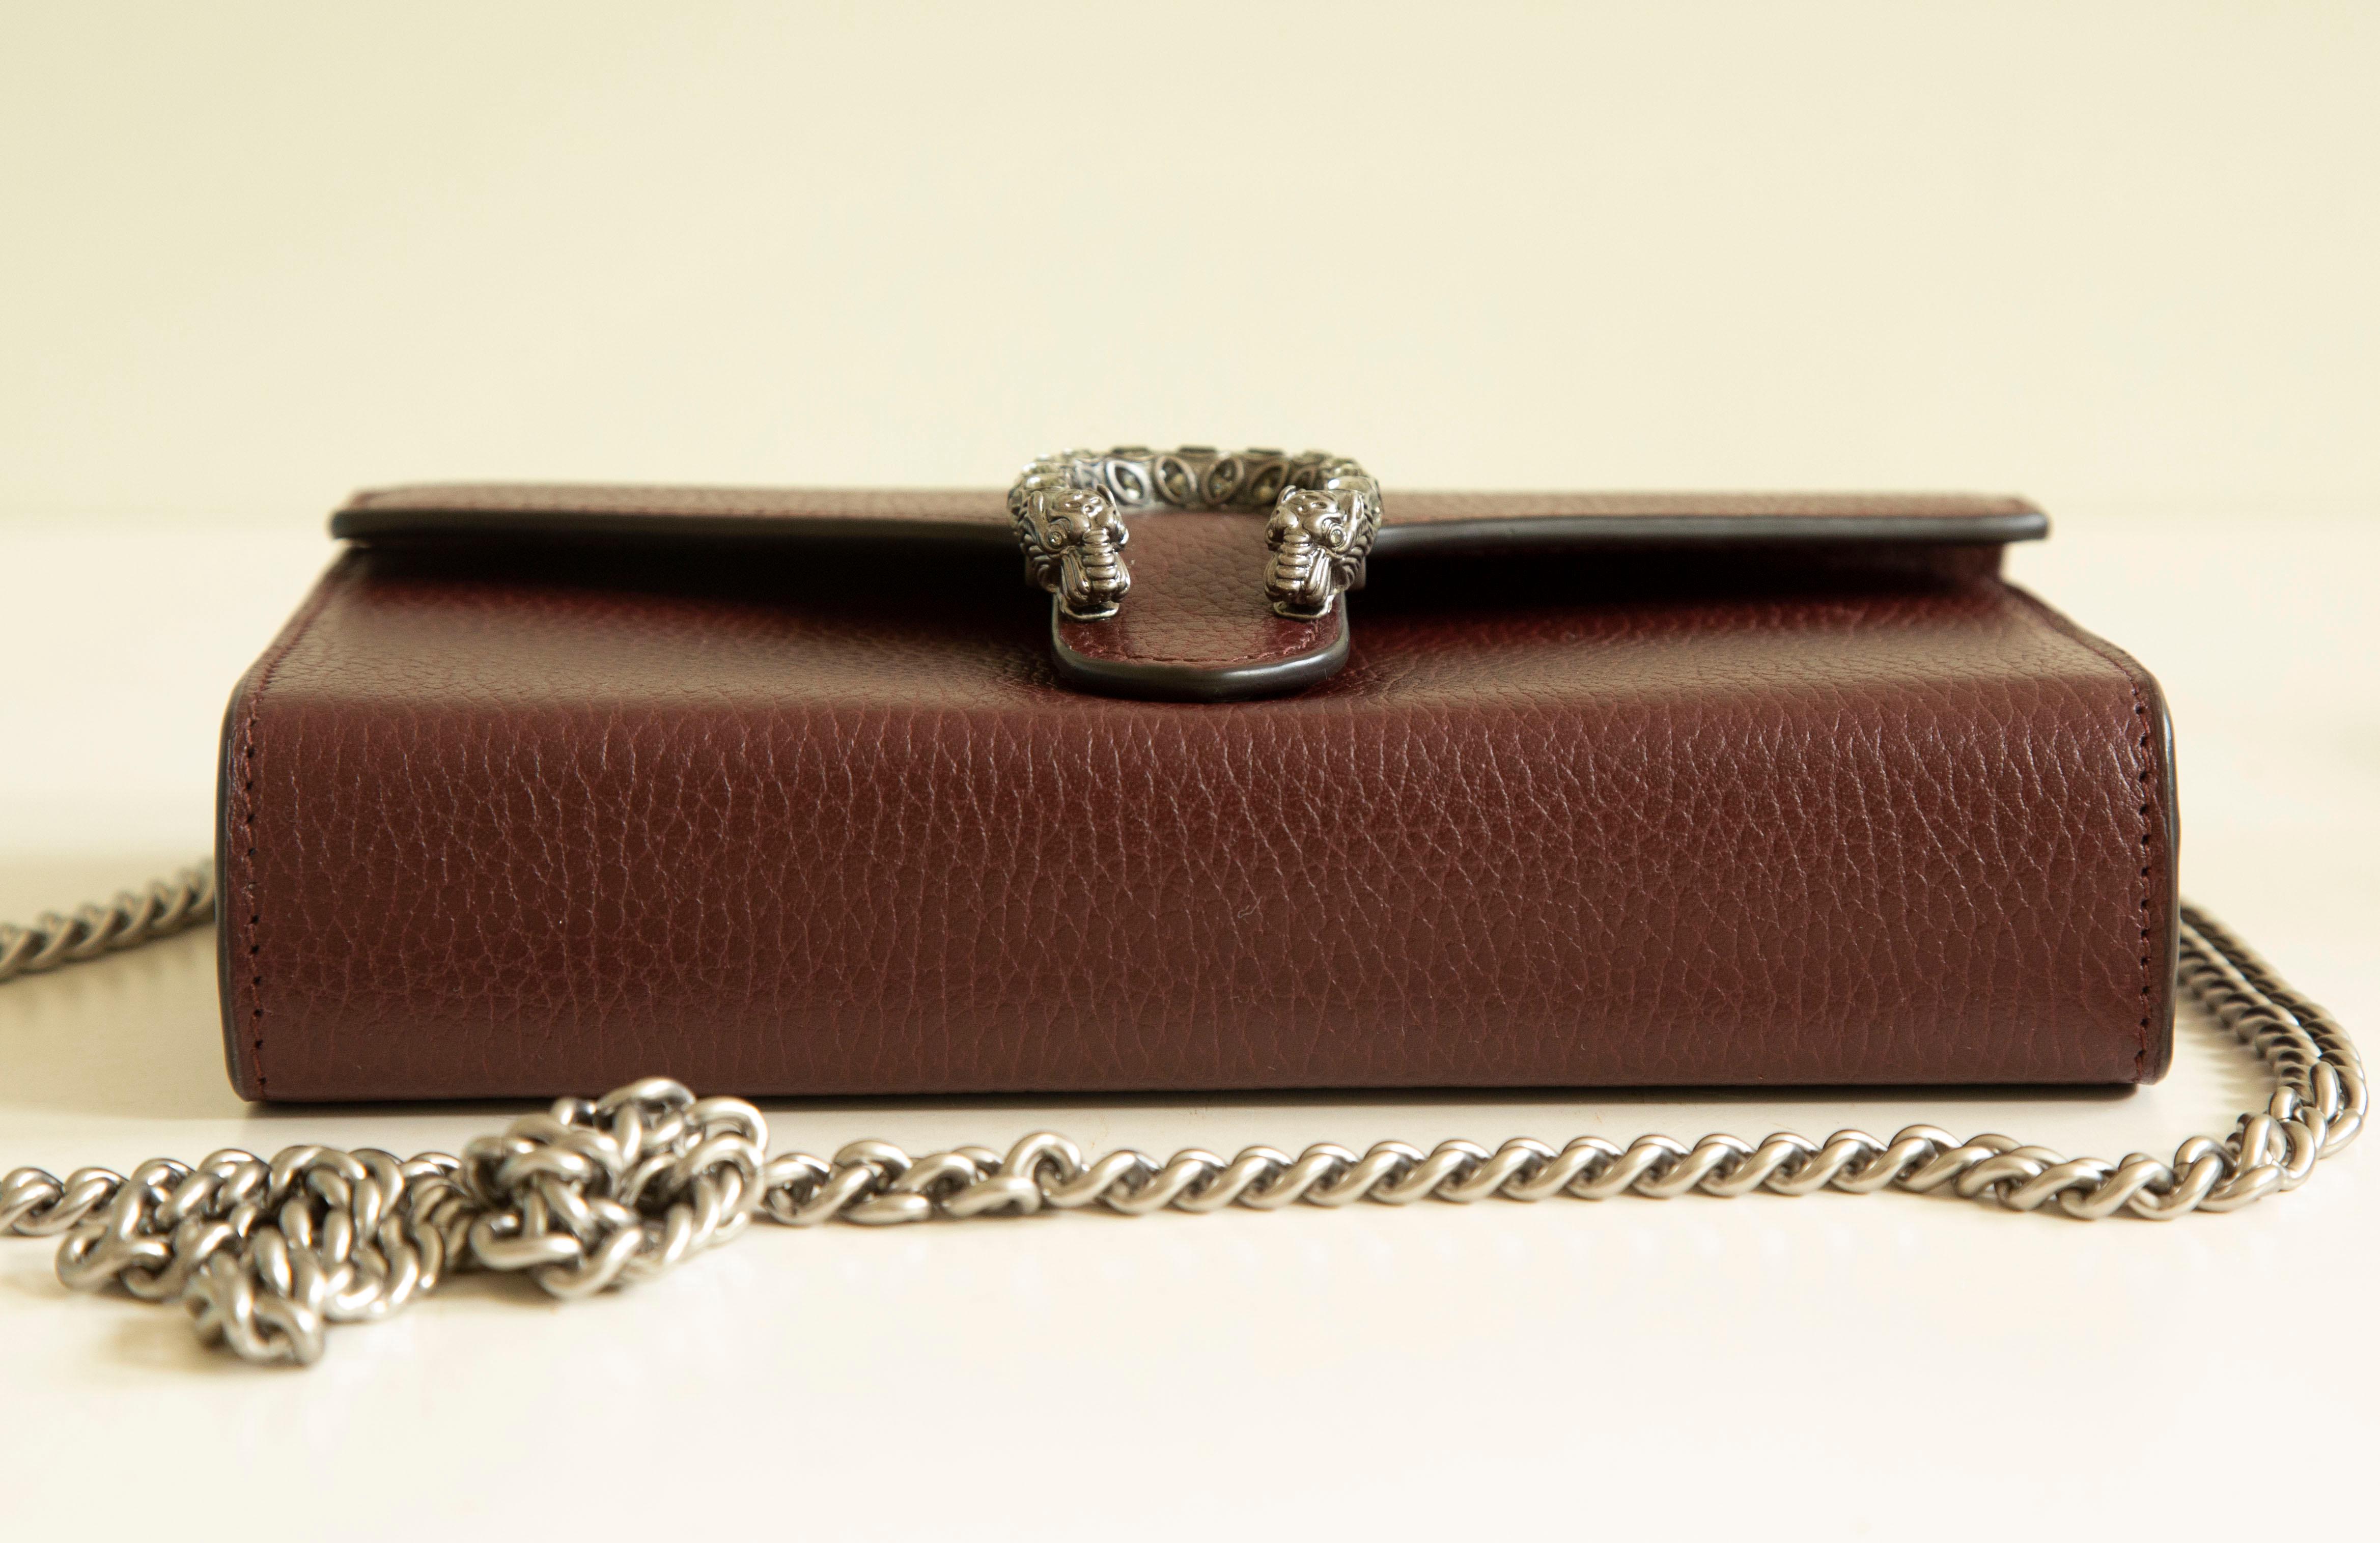 Gucci Dionysus Chain Wallet Crossbody Bag Burgundy Leather In Excellent Condition For Sale In Arnhem, NL